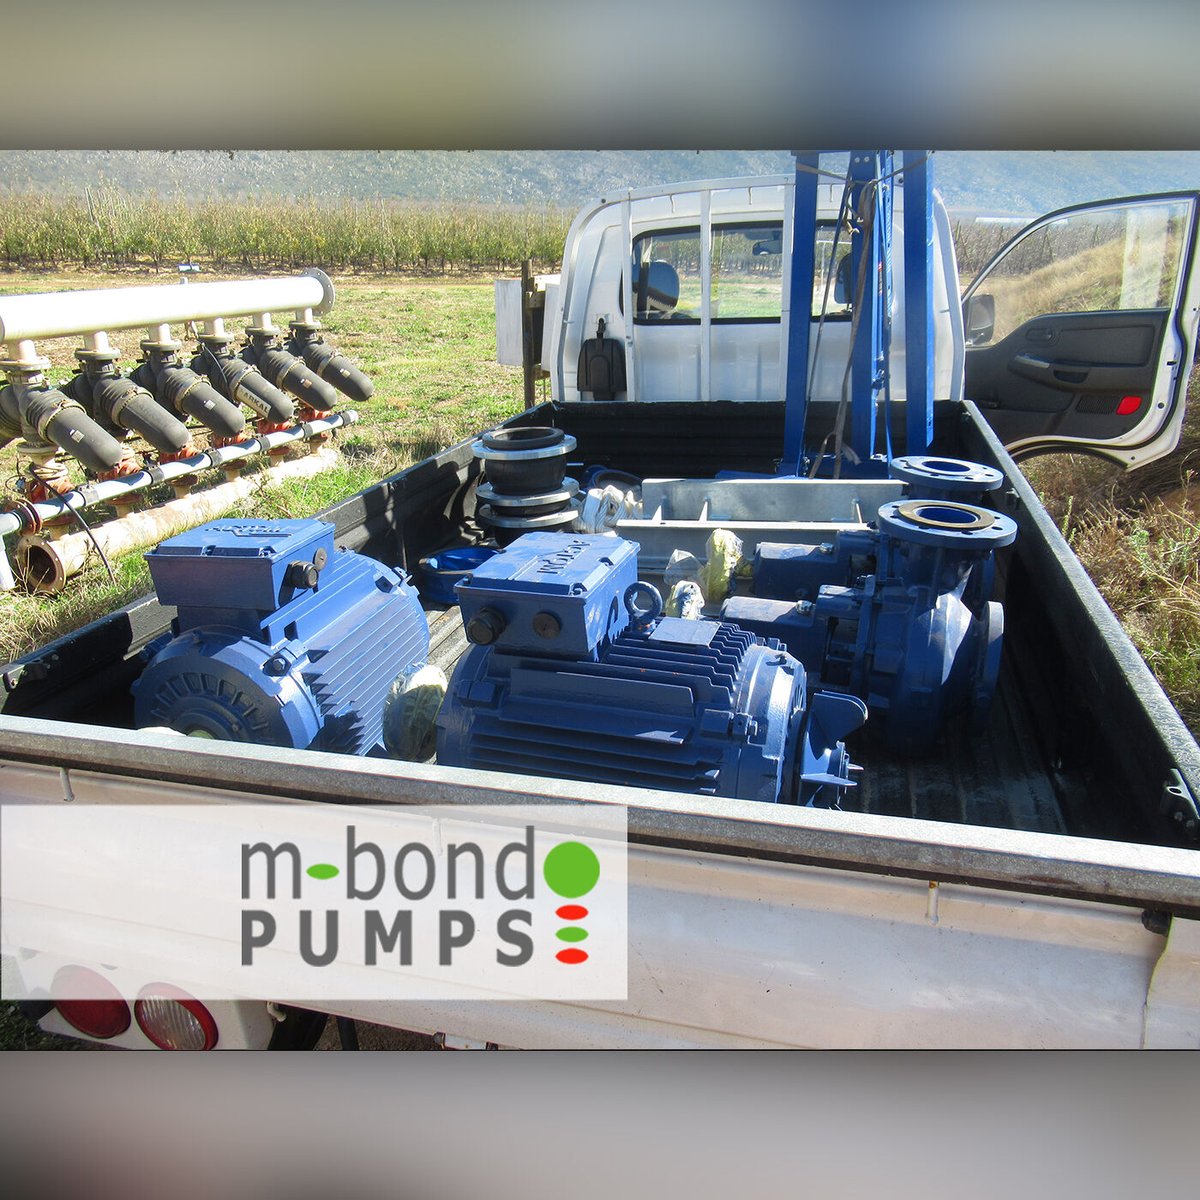 Another 5 star load of high quality repaired electric motors and irrigation water pumps being delivered for installation to a large fruit farm for installation before the season start. #irrigationpump #electricmotorsforsale #waterpump #mbondpumps #waterpumprepair